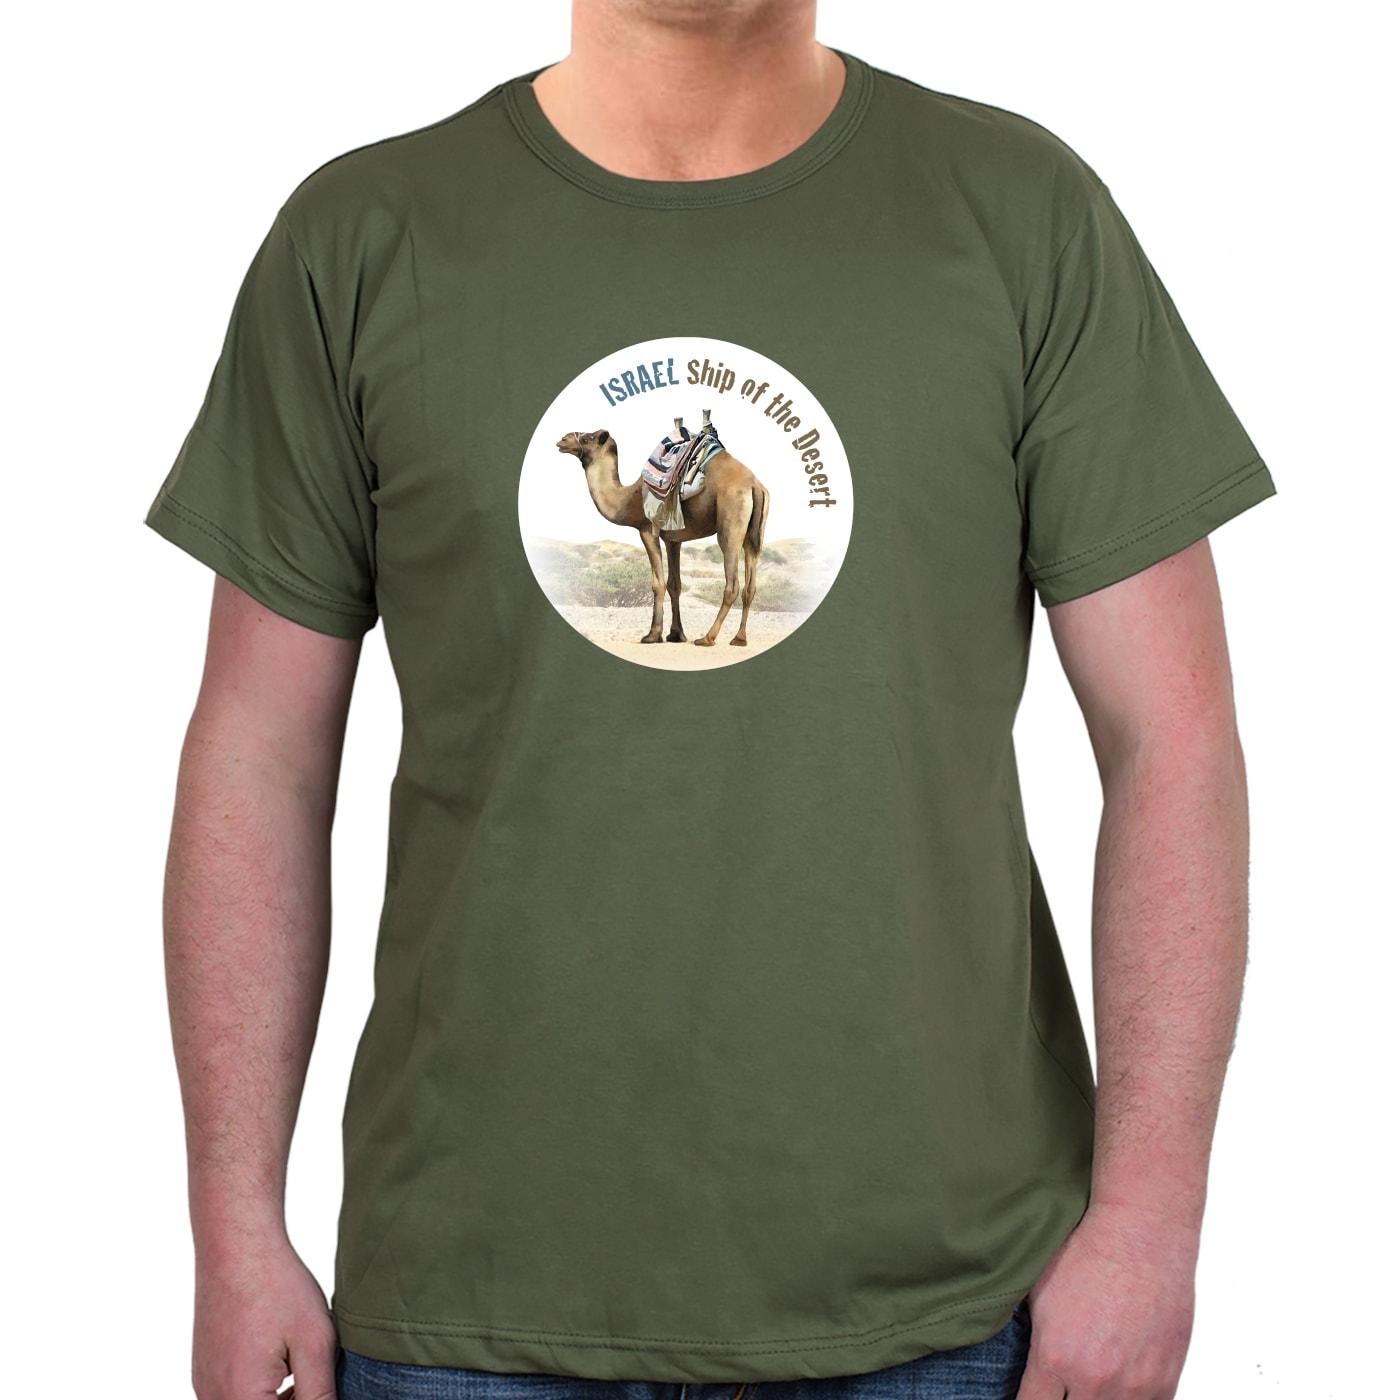 Israel T-Shirt - Ship of the Desert. Variety of Colors - 6